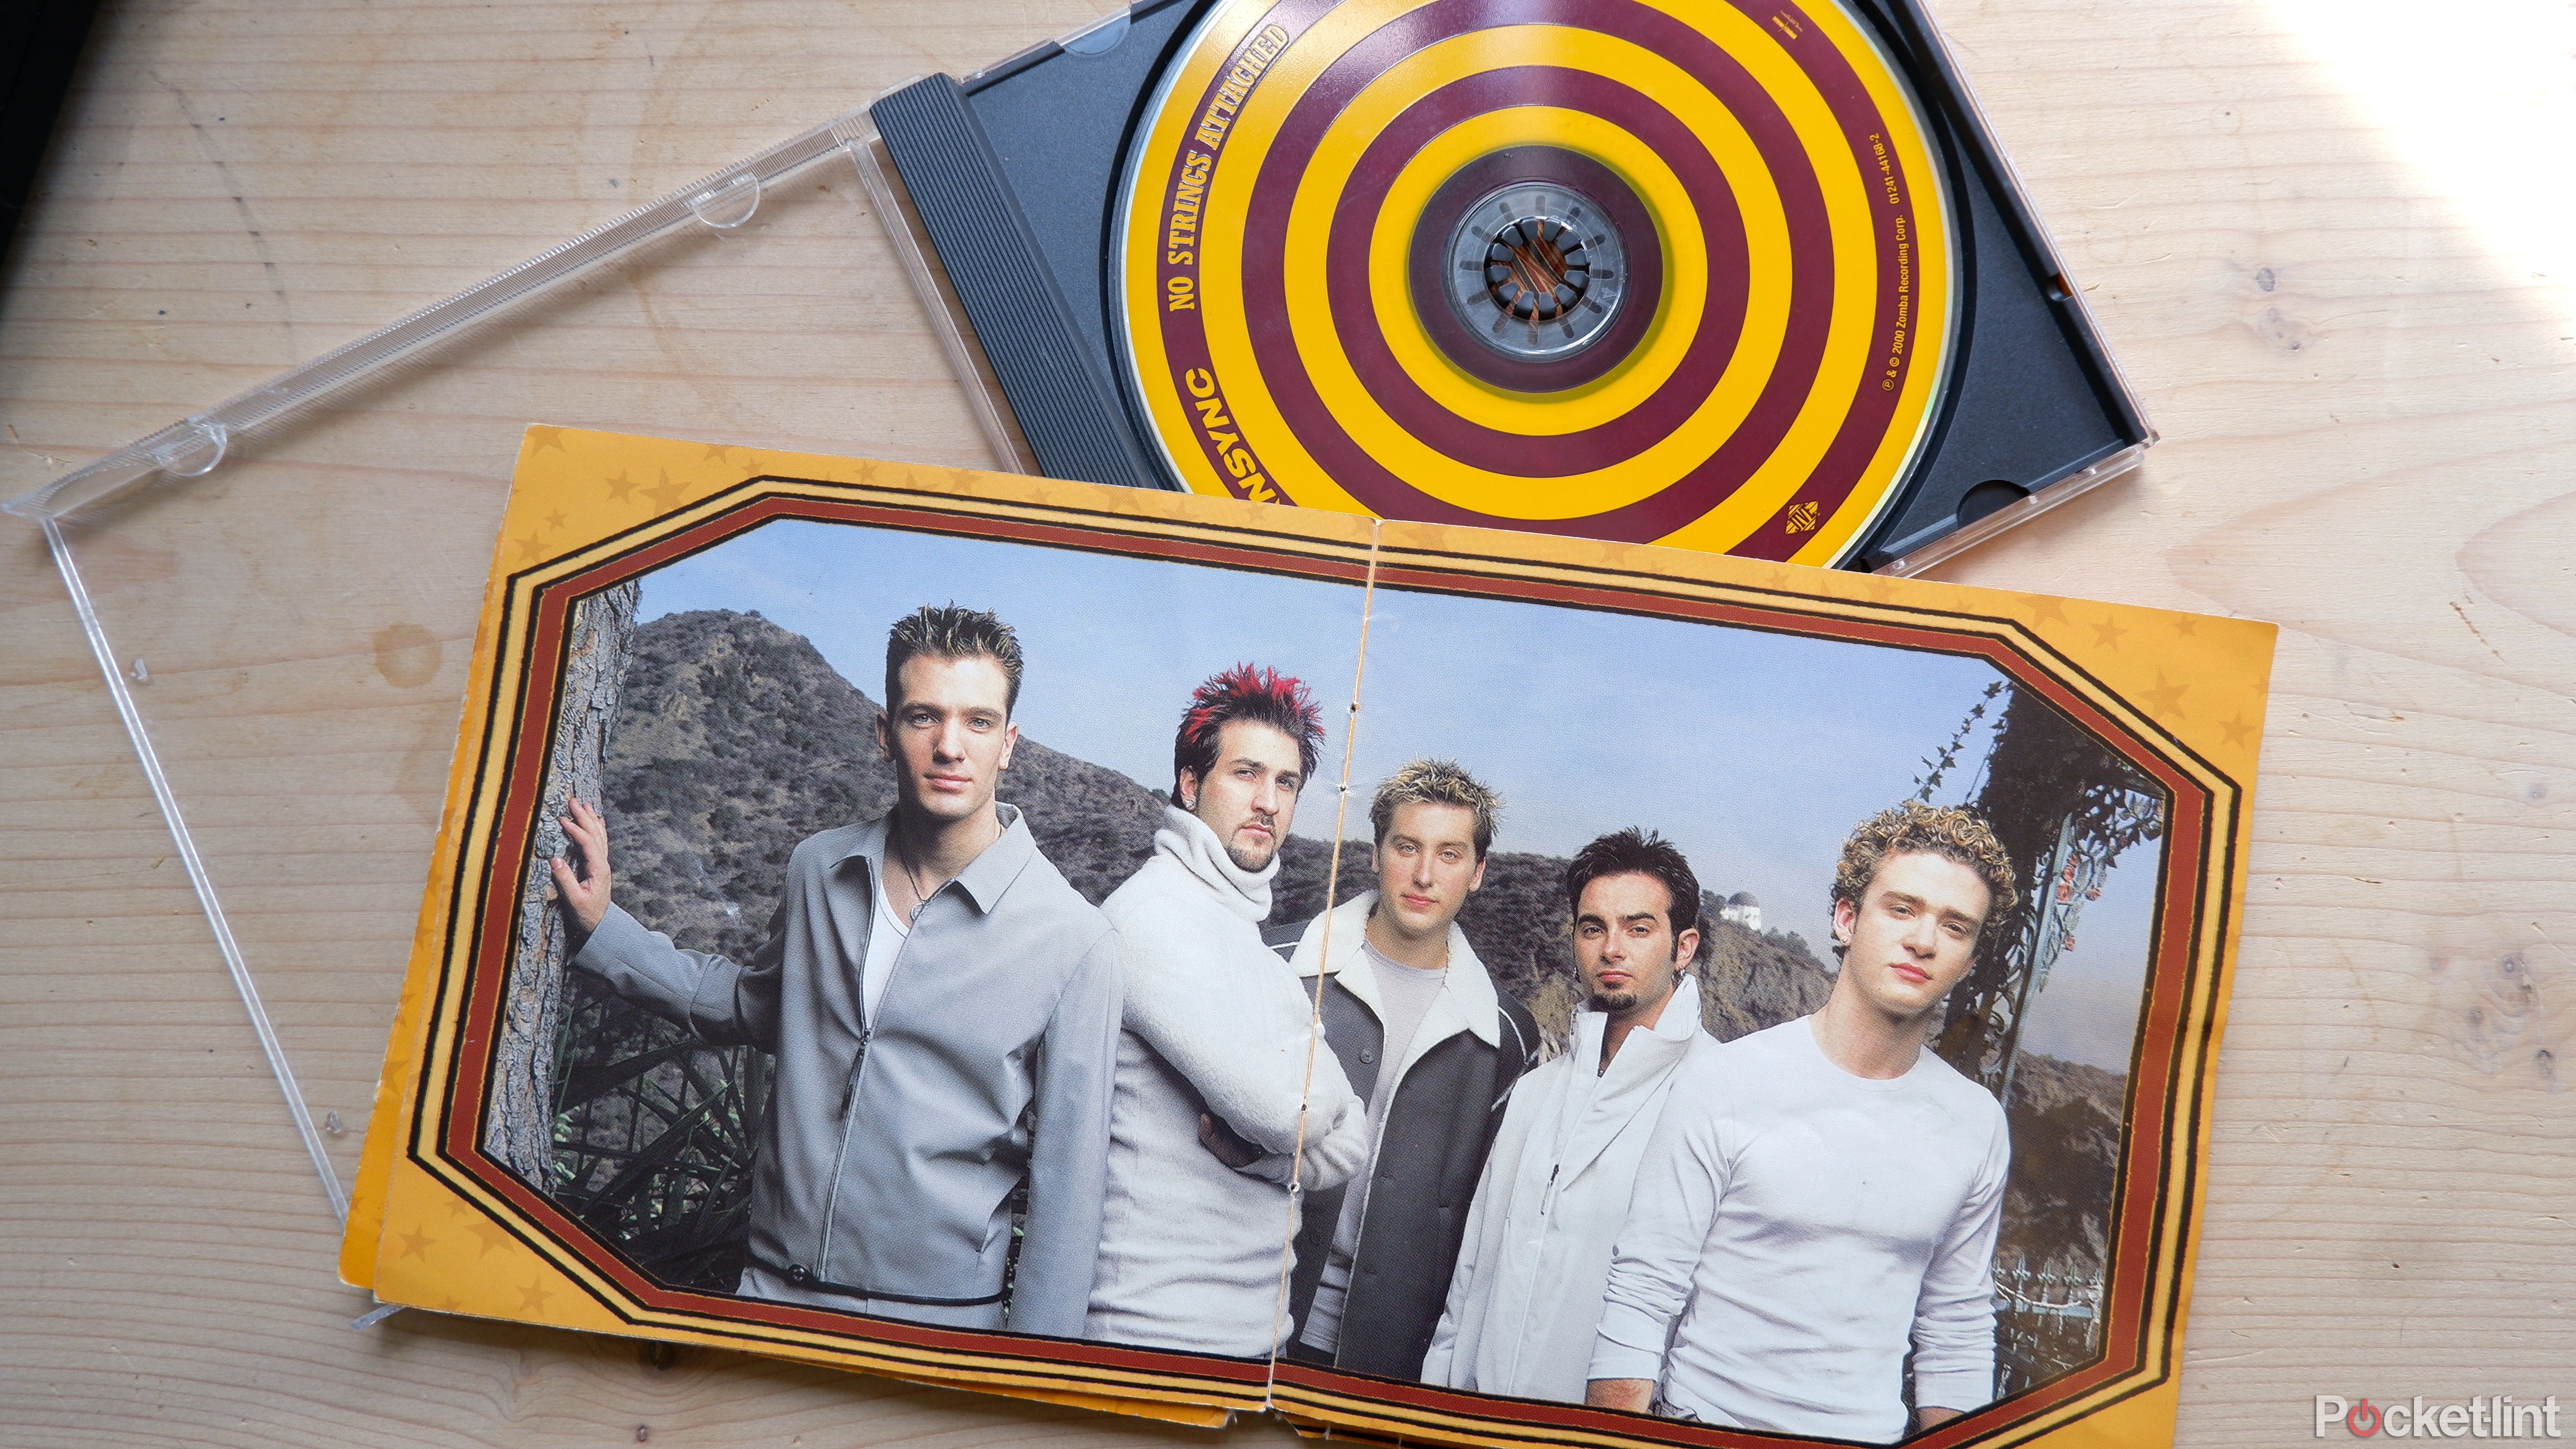 The album insert from NSYNC's album No Strings Attached, showing a photo of the whole band.